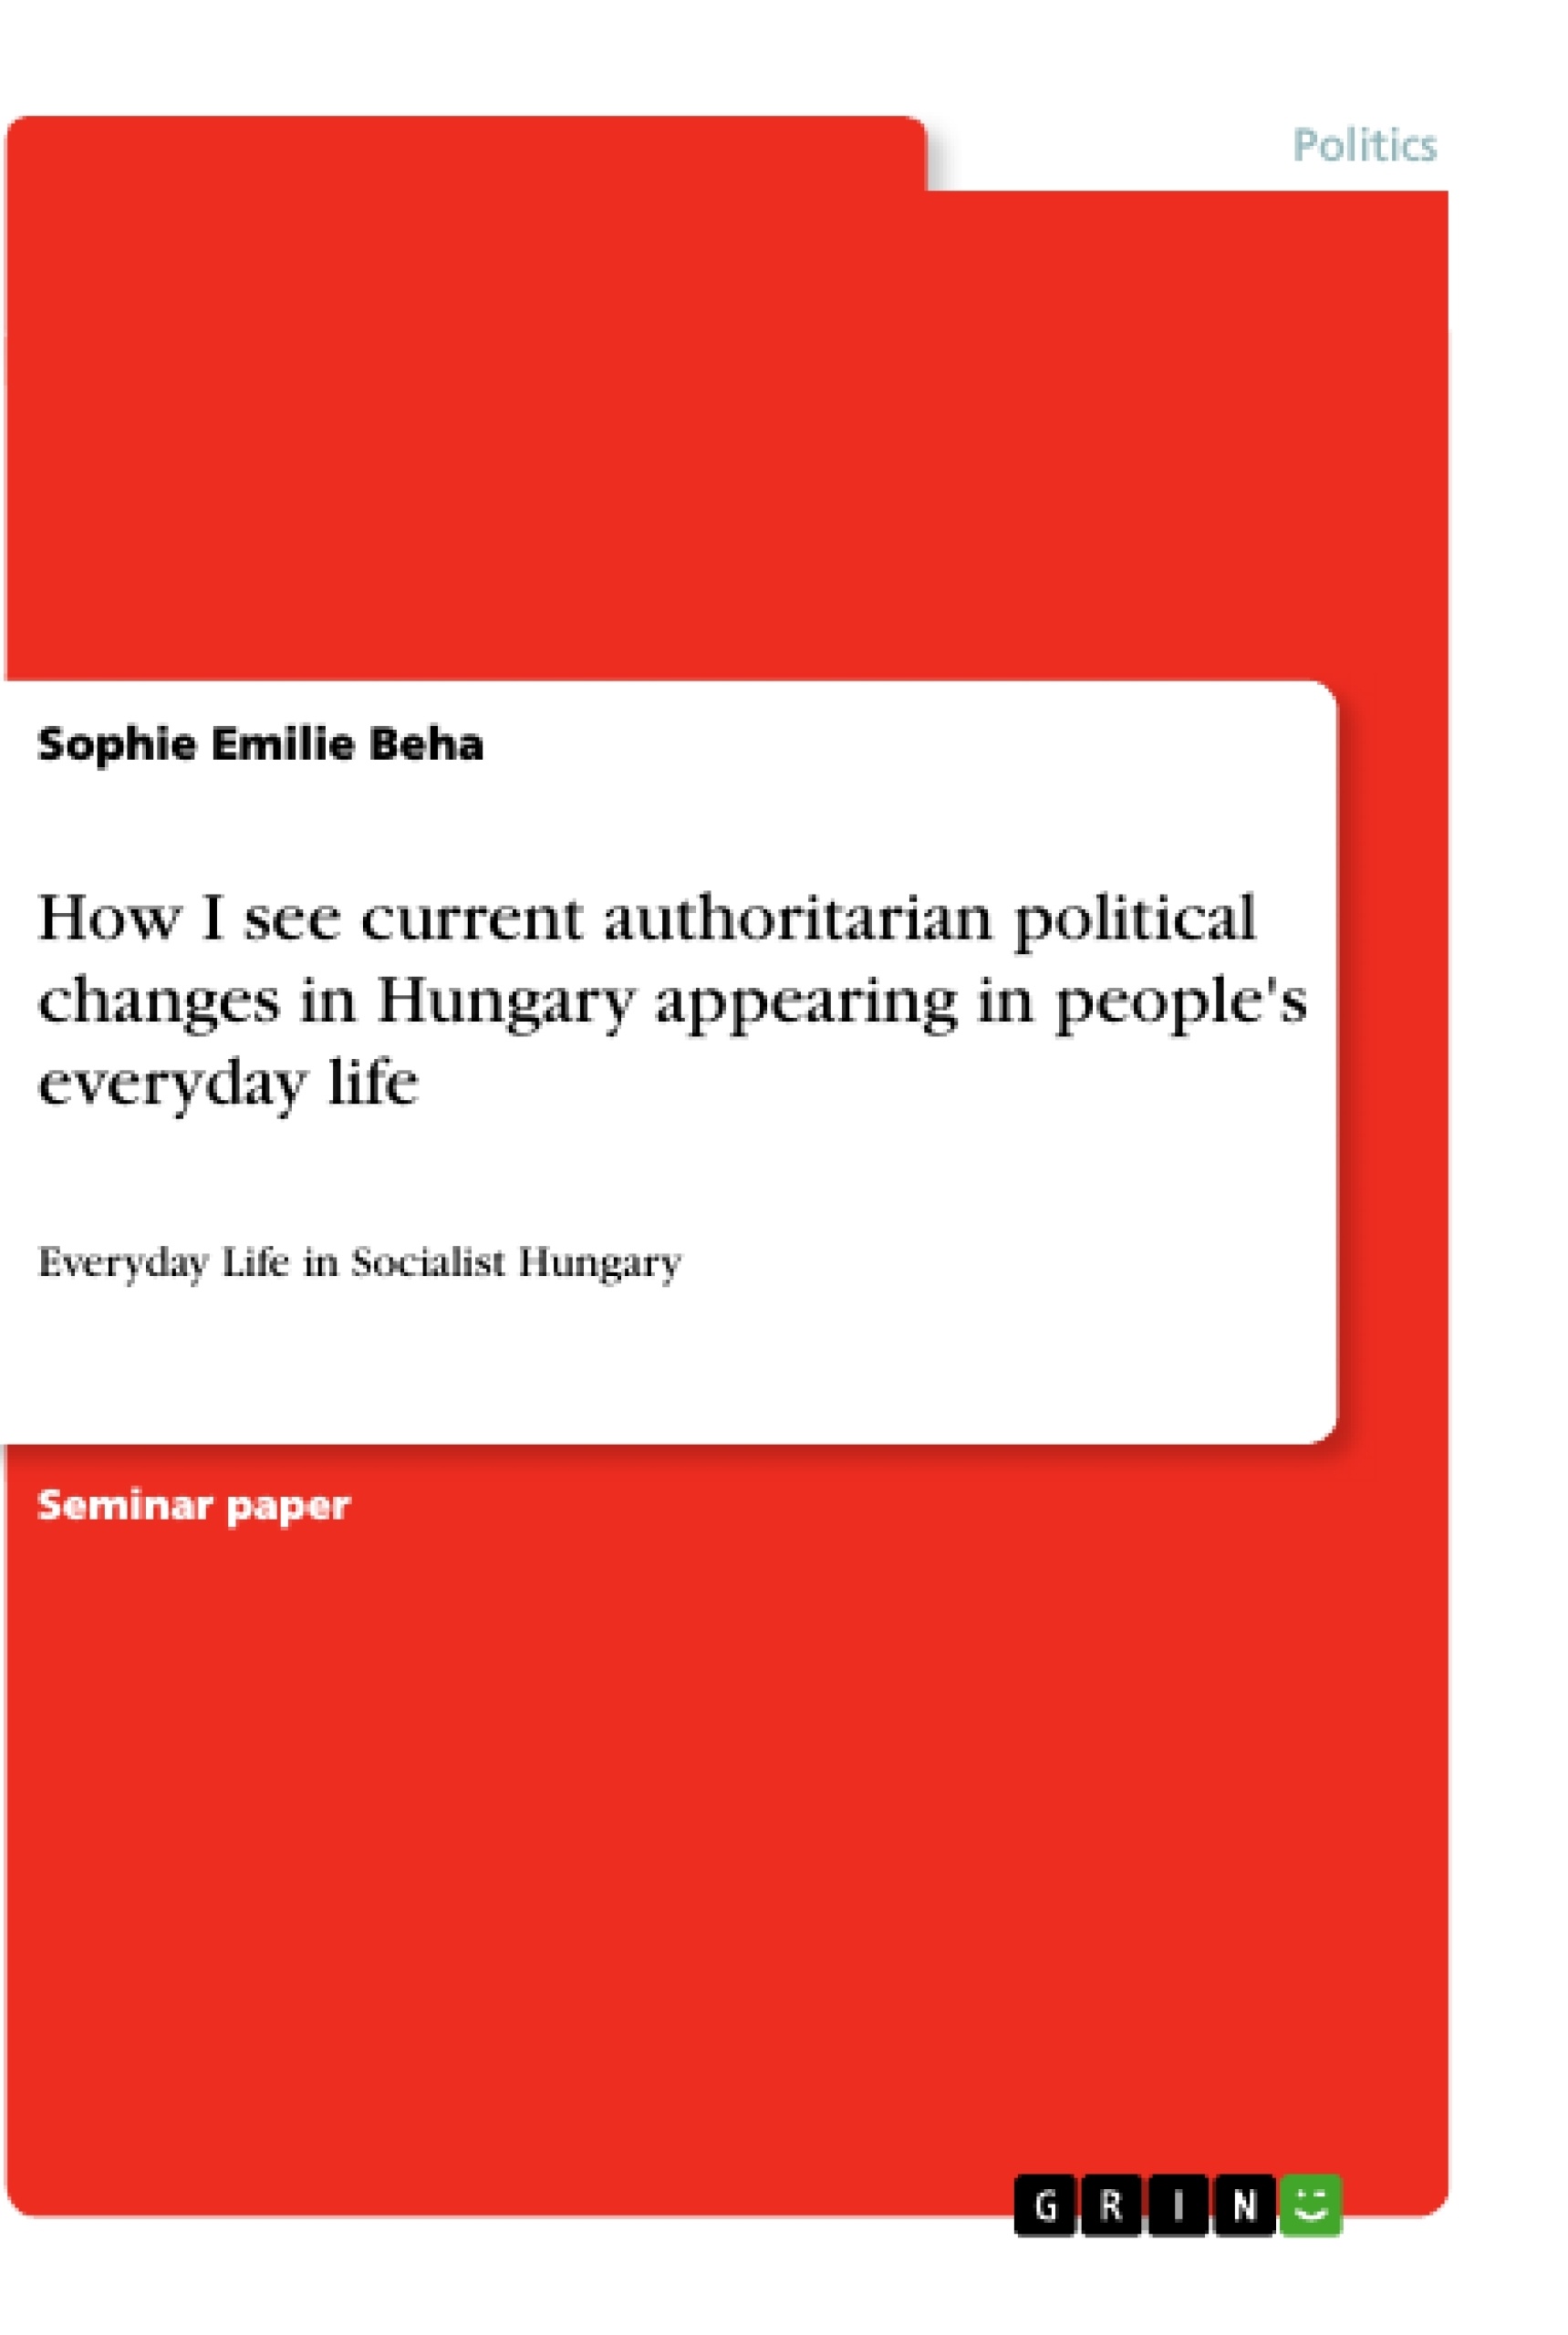 Titre: How I see current authoritarian political changes in Hungary appearing in people's everyday life